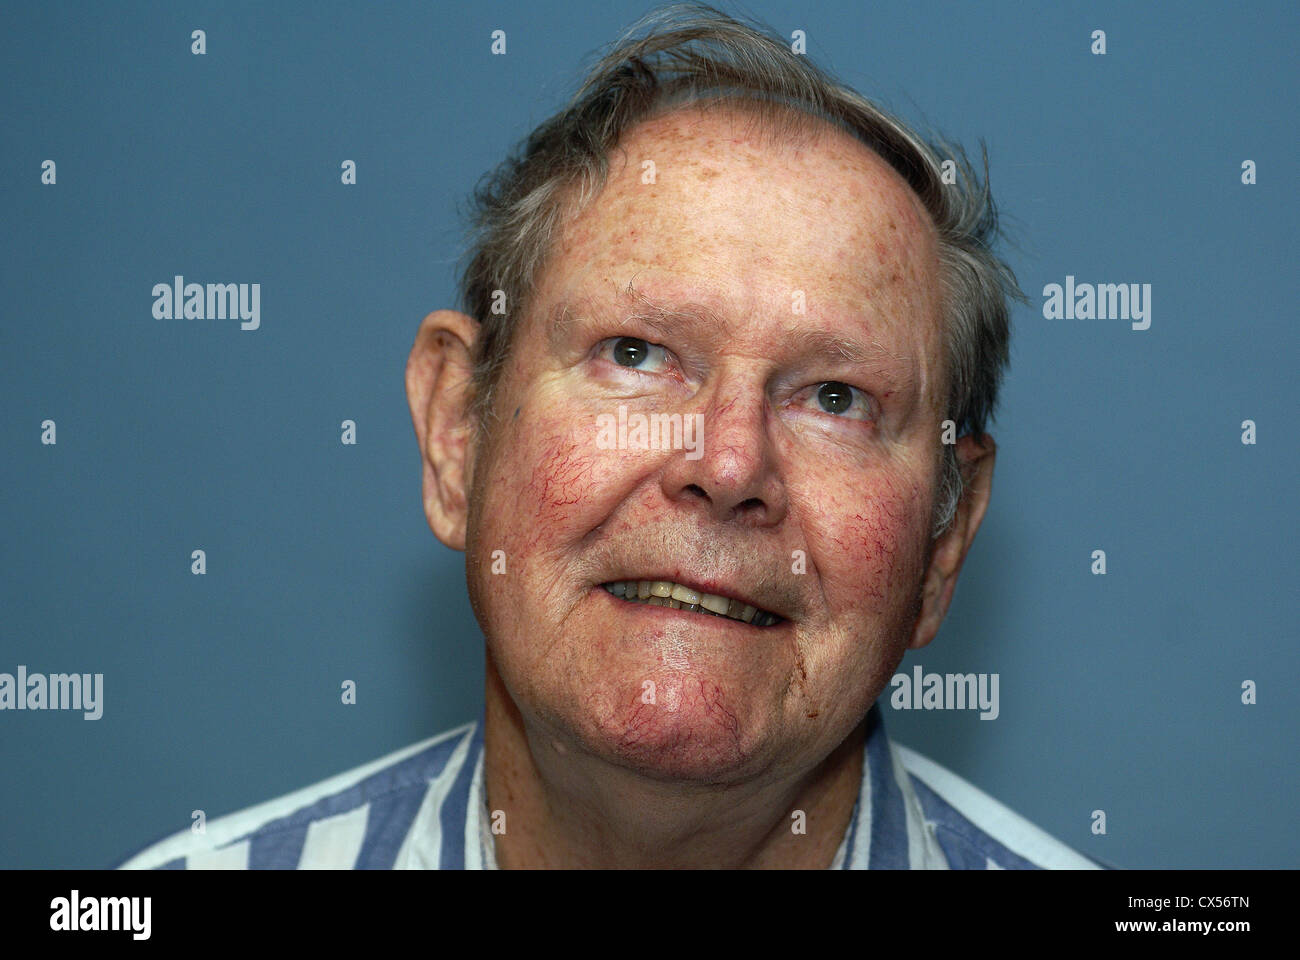 Elderly man's face showing age spots, blood vessels and skin sploctches. Stock Photo